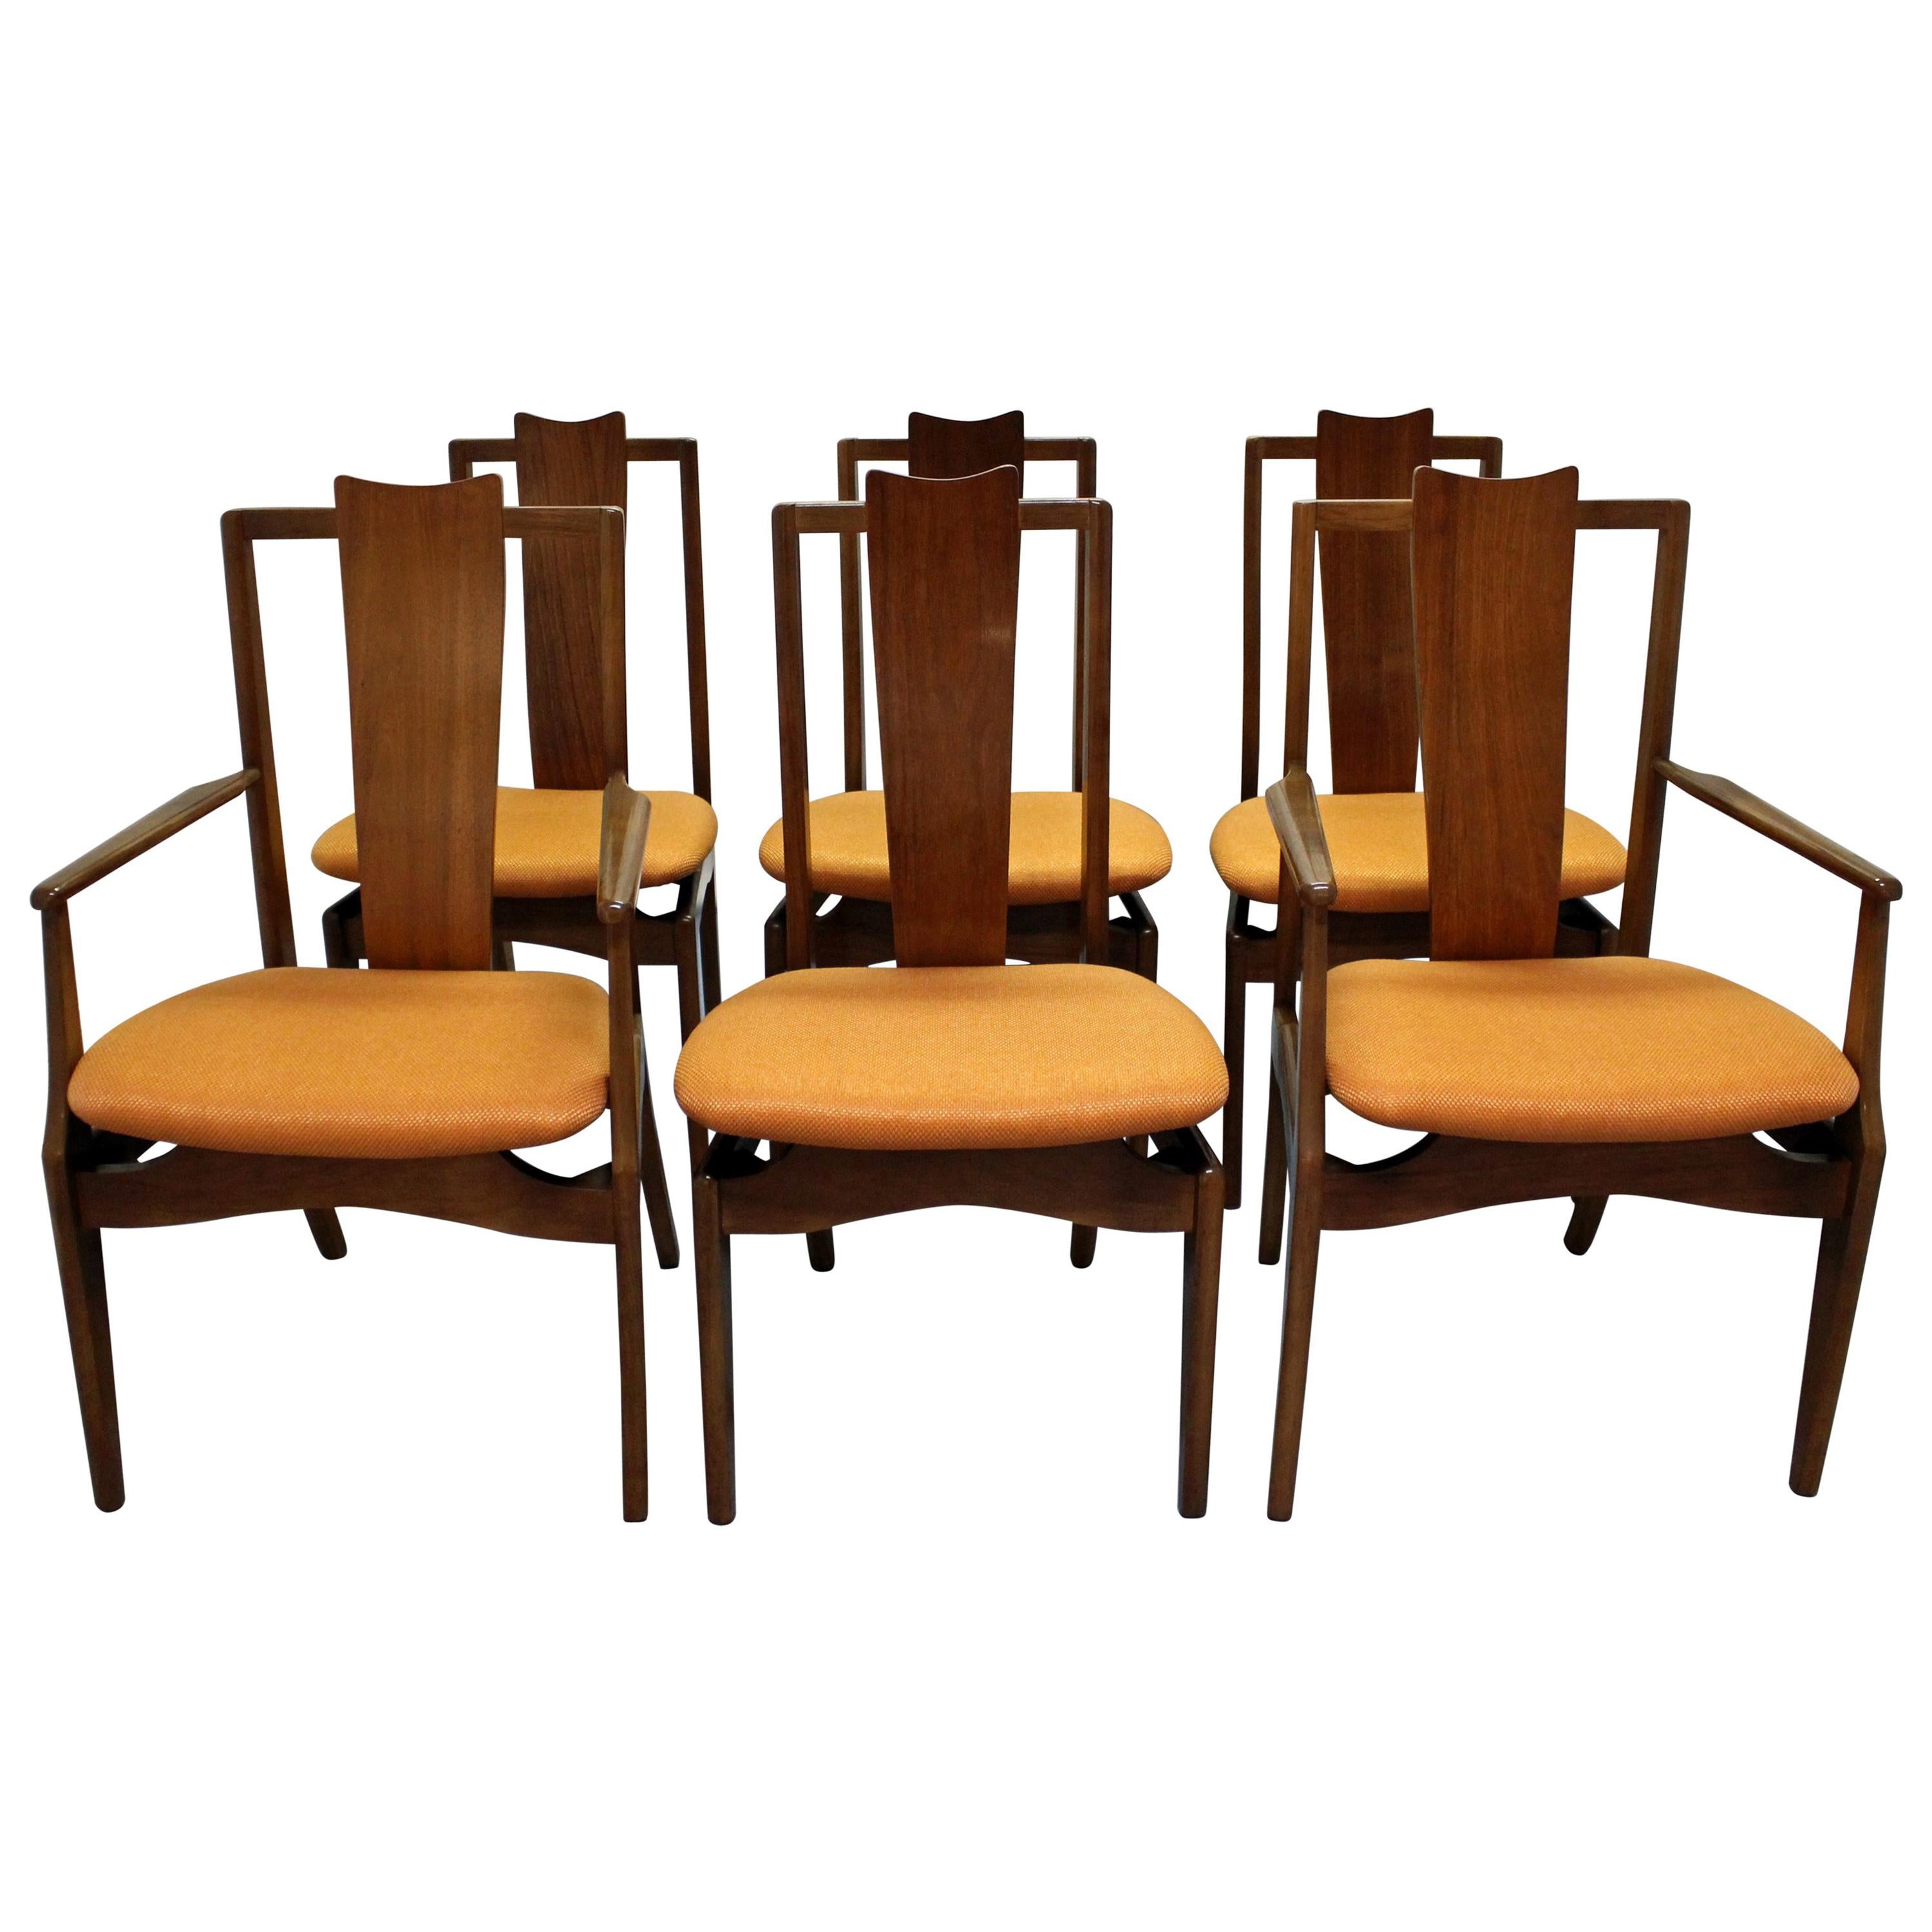 Set of Six Mid-Century Modern Floating Seat Dining Chairs